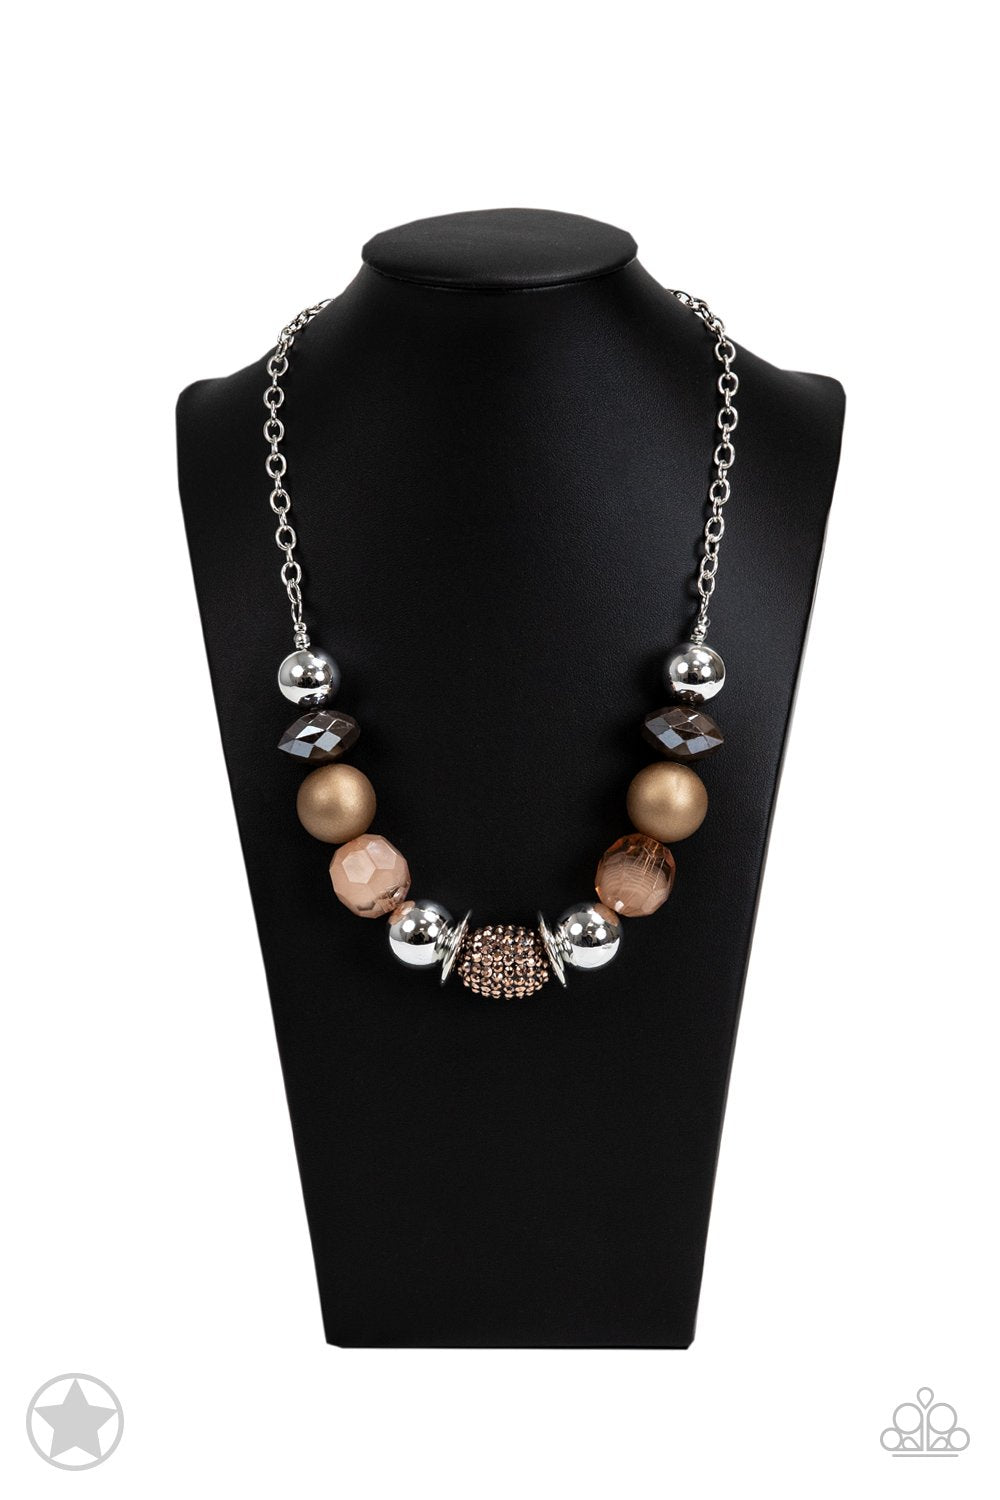 A Warm Welcome Copper Bead Necklace and matching Earrings - Paparazzi Accessories- on bust -CarasShop.com - $5 Jewelry by Cara Jewels